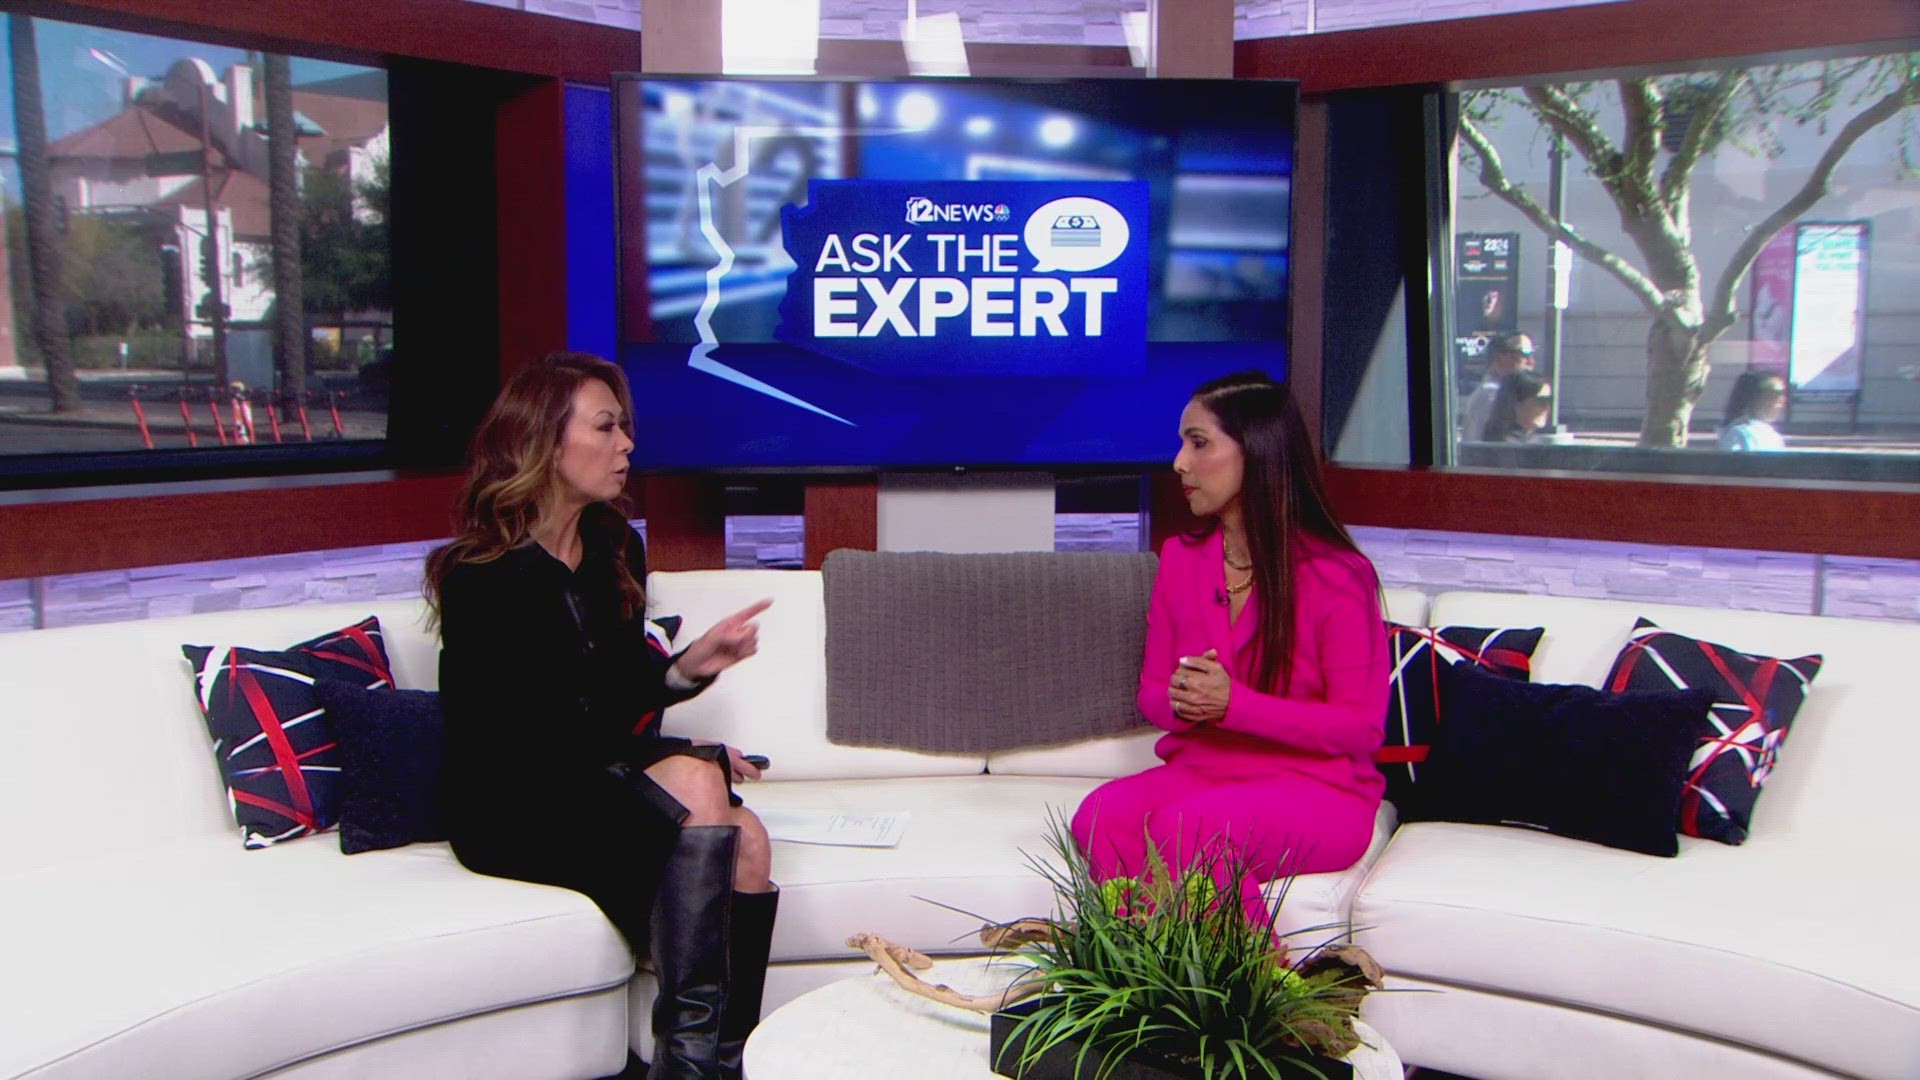 12News asks a health expert about how women can stay healthy.